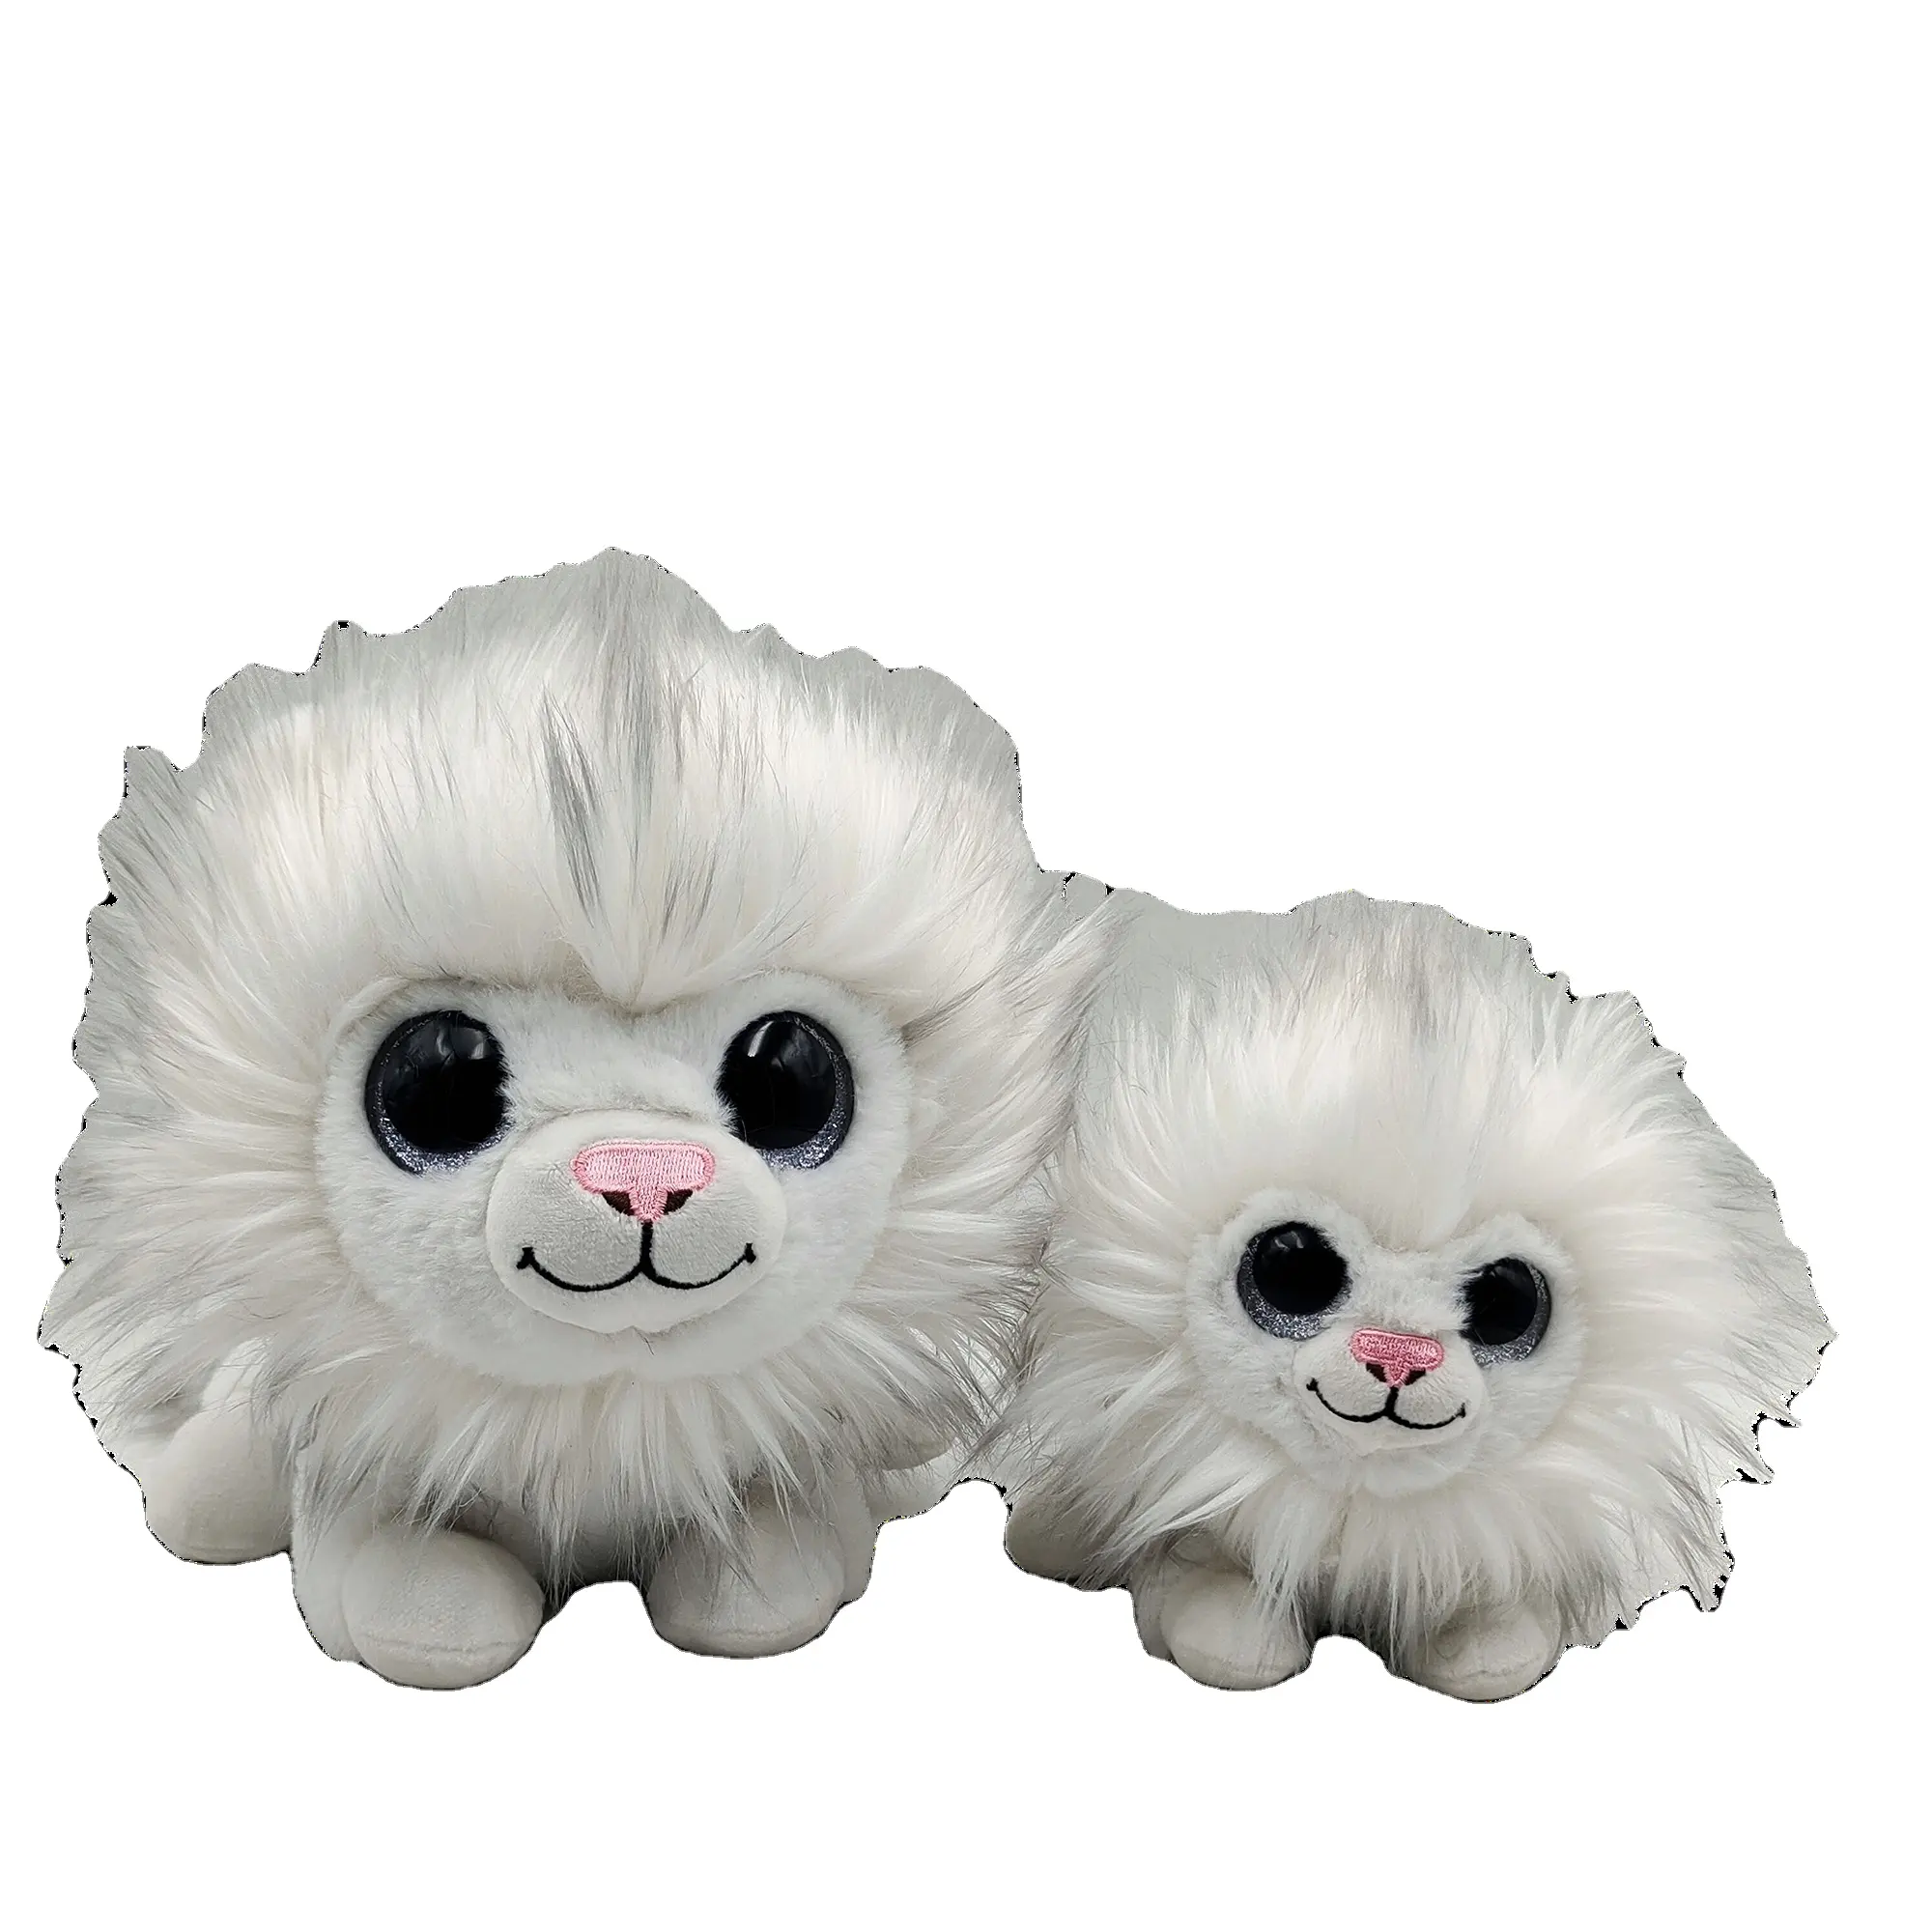 Hot selling high quality best decoration choice cute animal made in China white lion soft stuffed plush toy